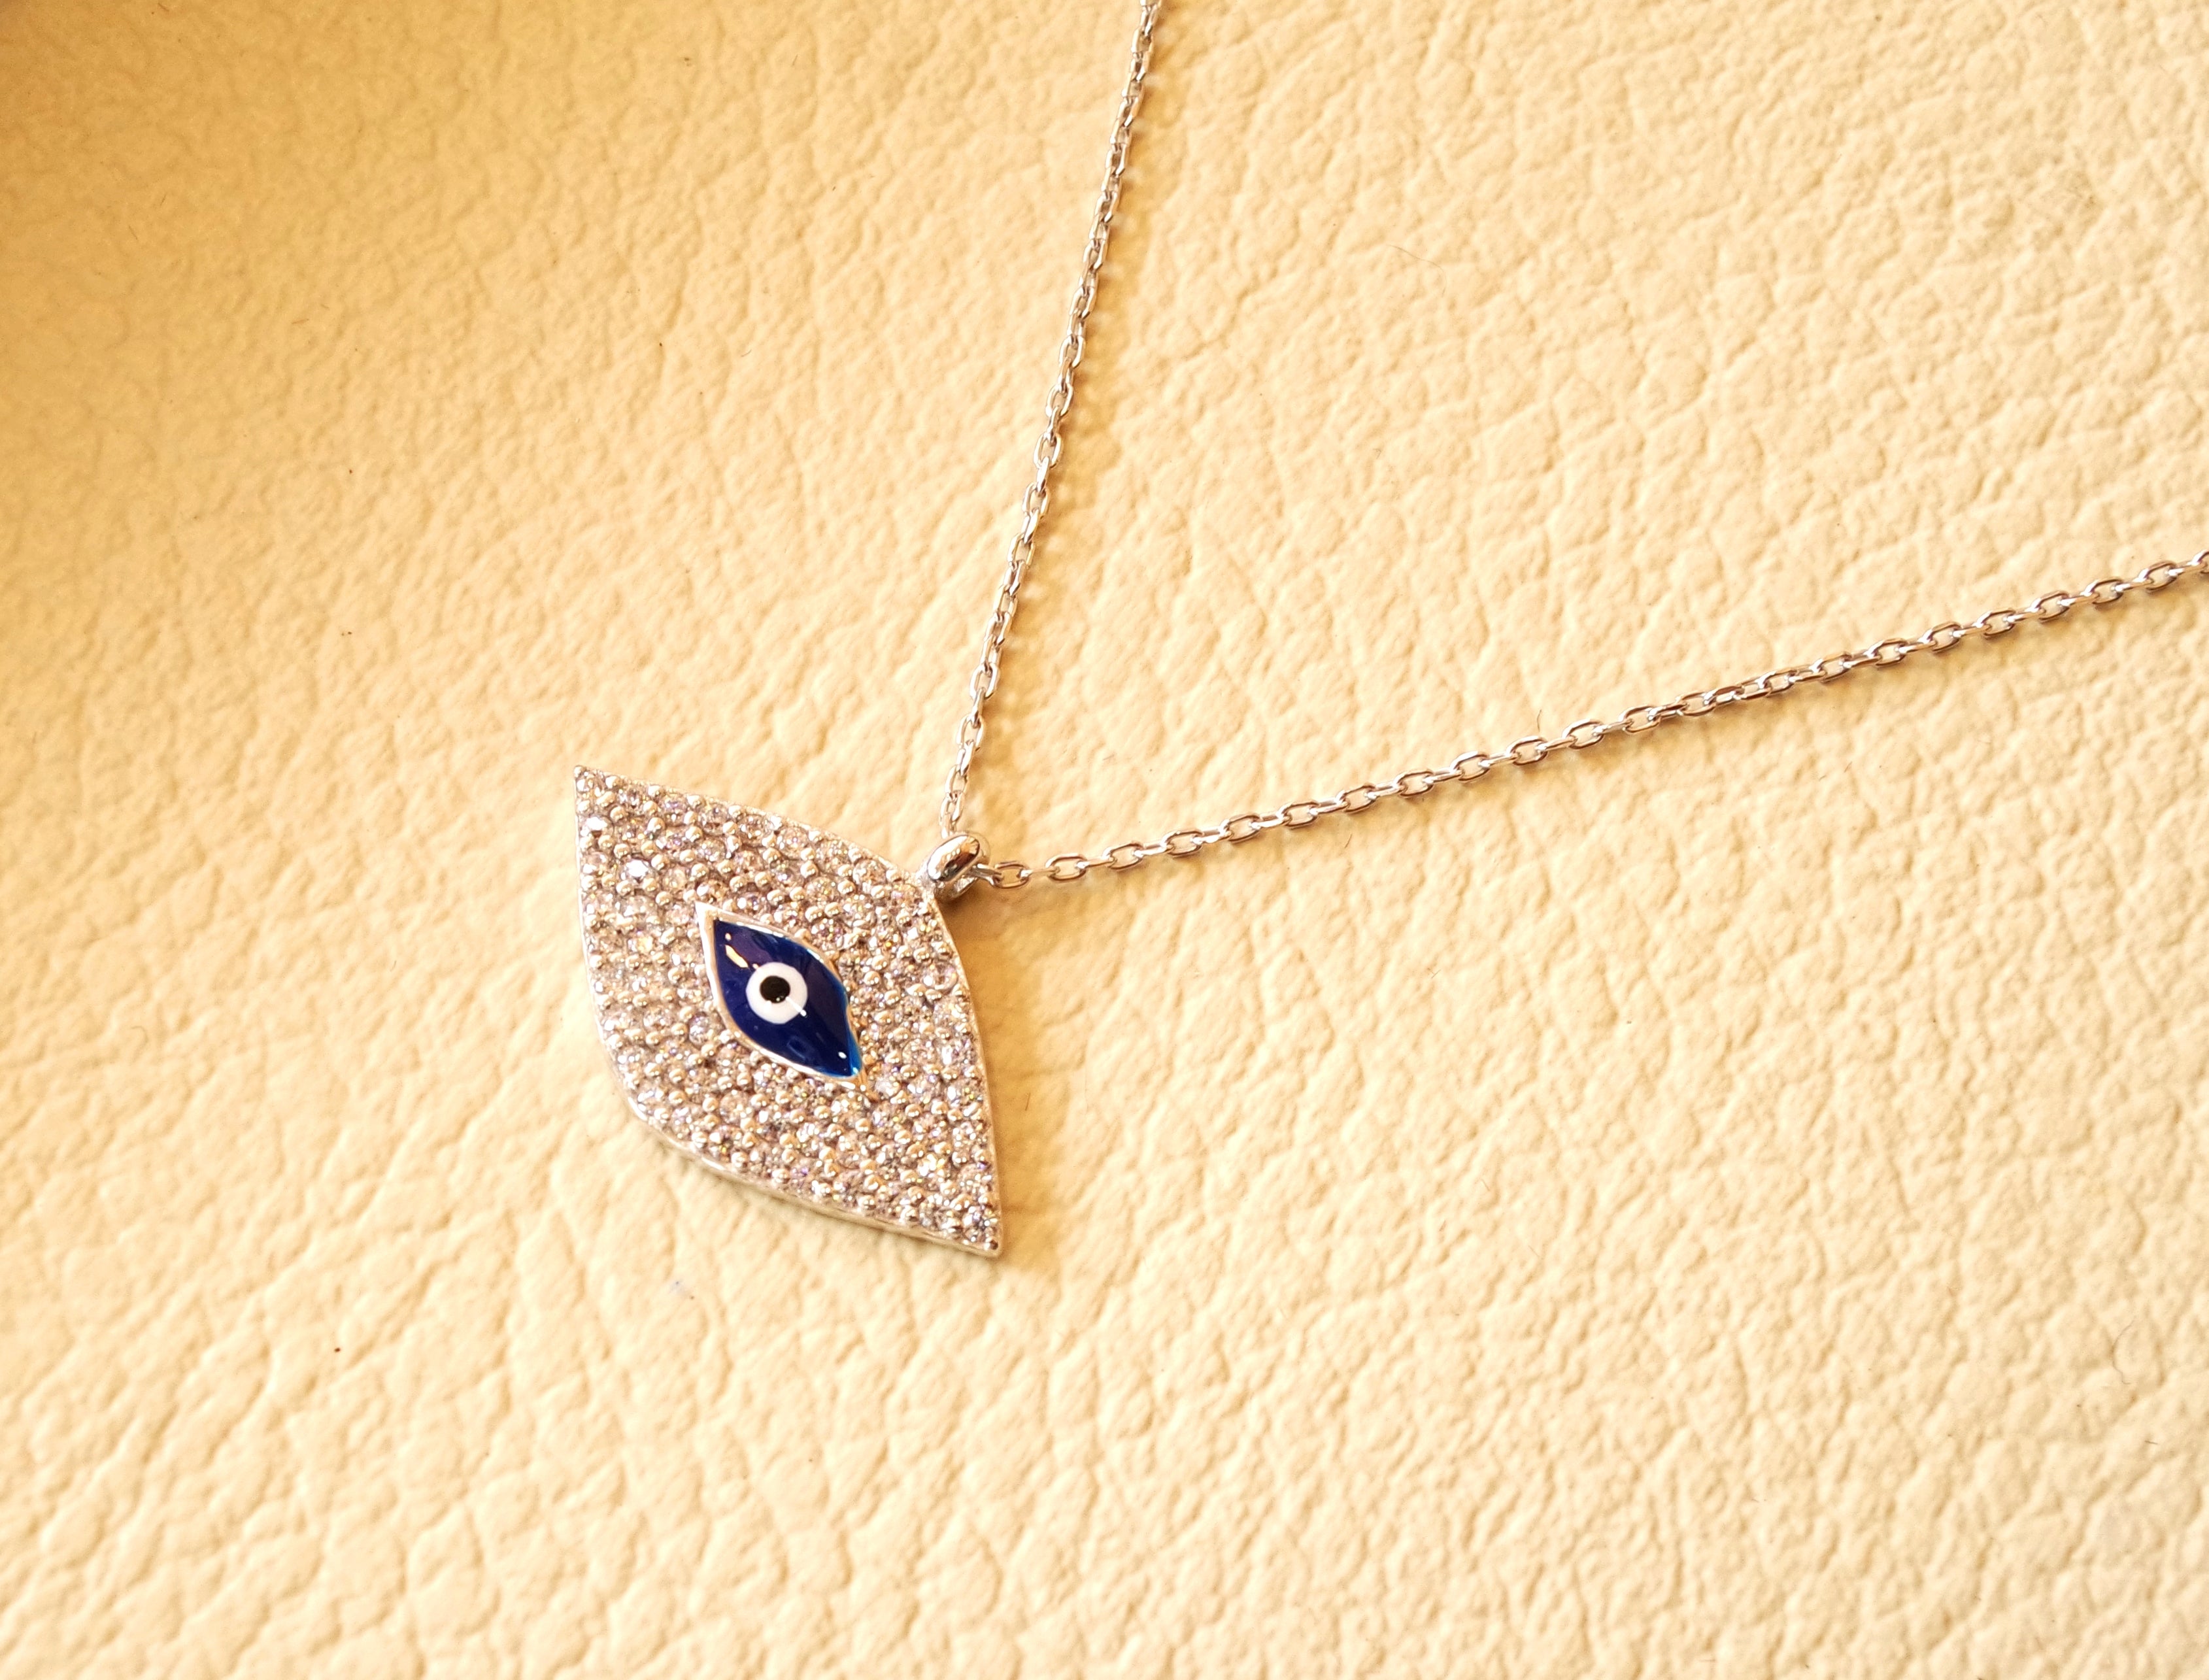 Eye necklace sterling silver 925 and cubic zirconia high quality gift box jewelry